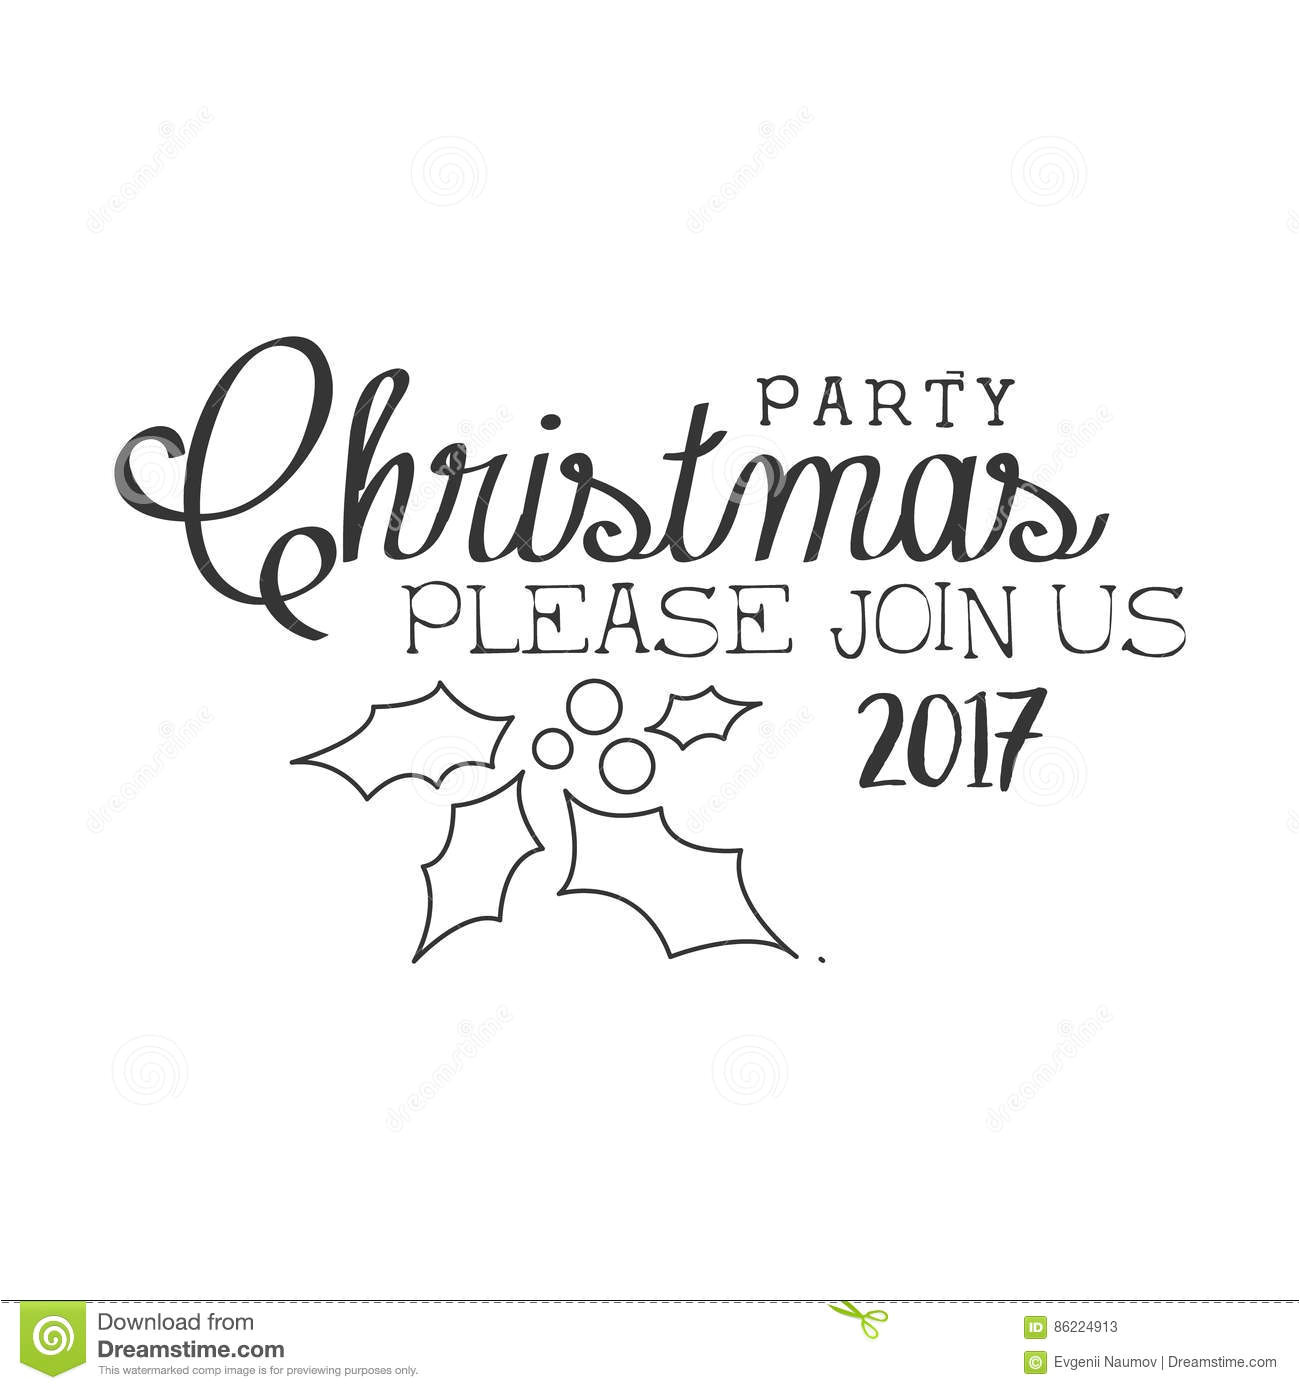 Christmas Party Invitation Template Black and White 2017 Christmas Party Black and White Invitation Card